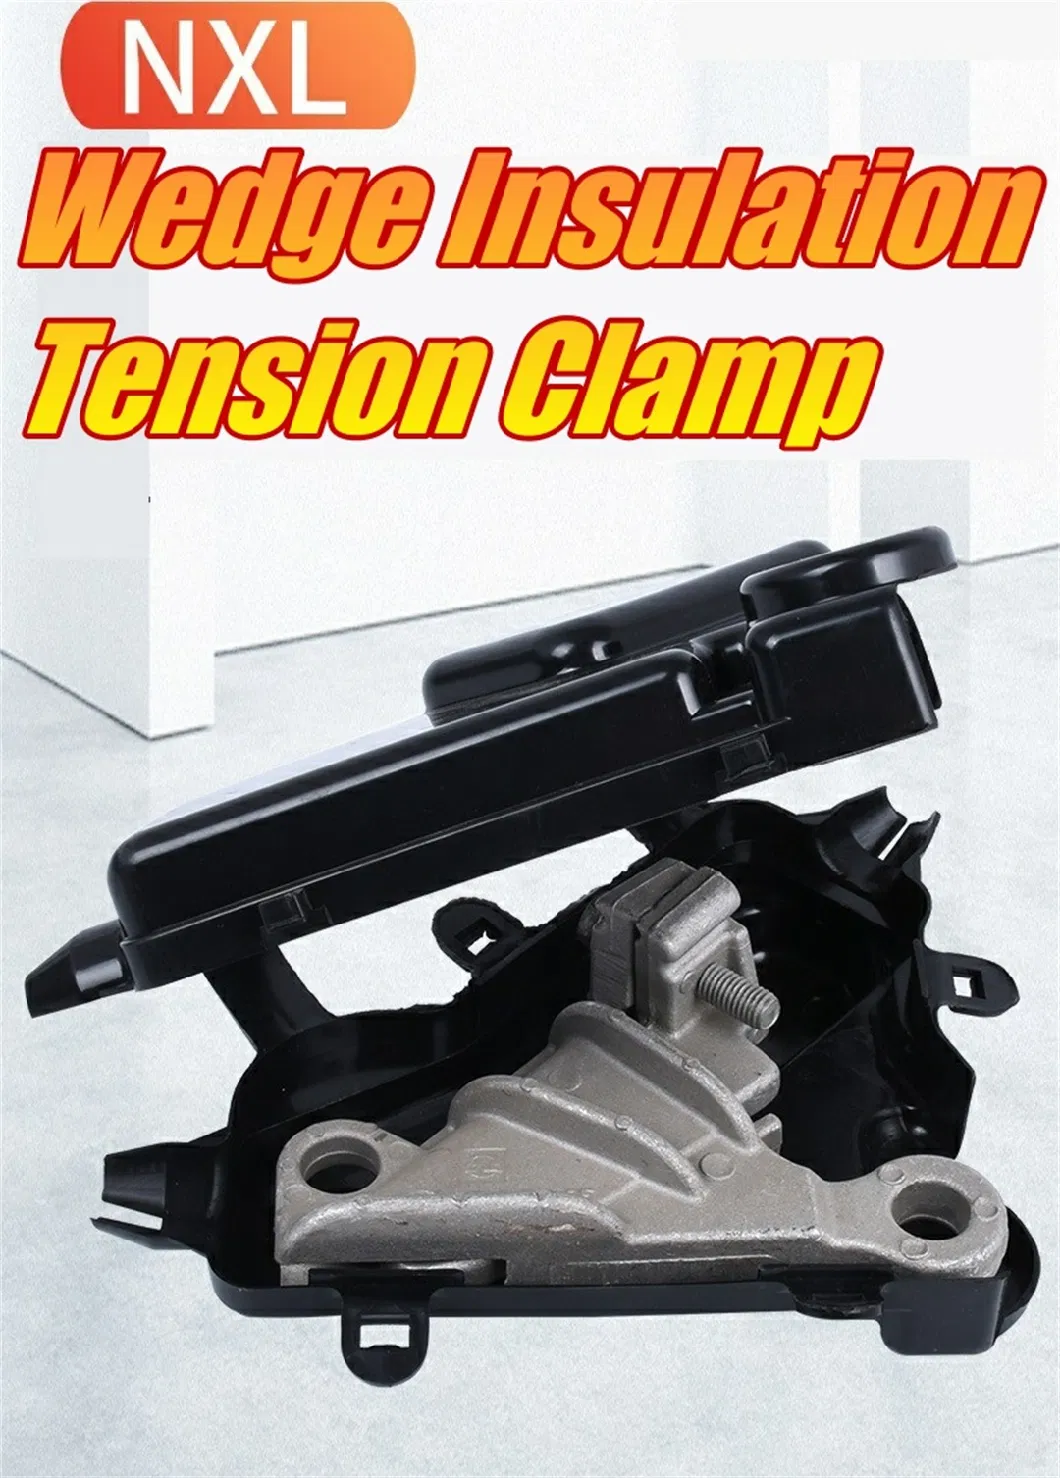 Nxl 35-240mm&sup2; 14.5-36.4kn Wedge Insulation Self-Locking Tension Clamp